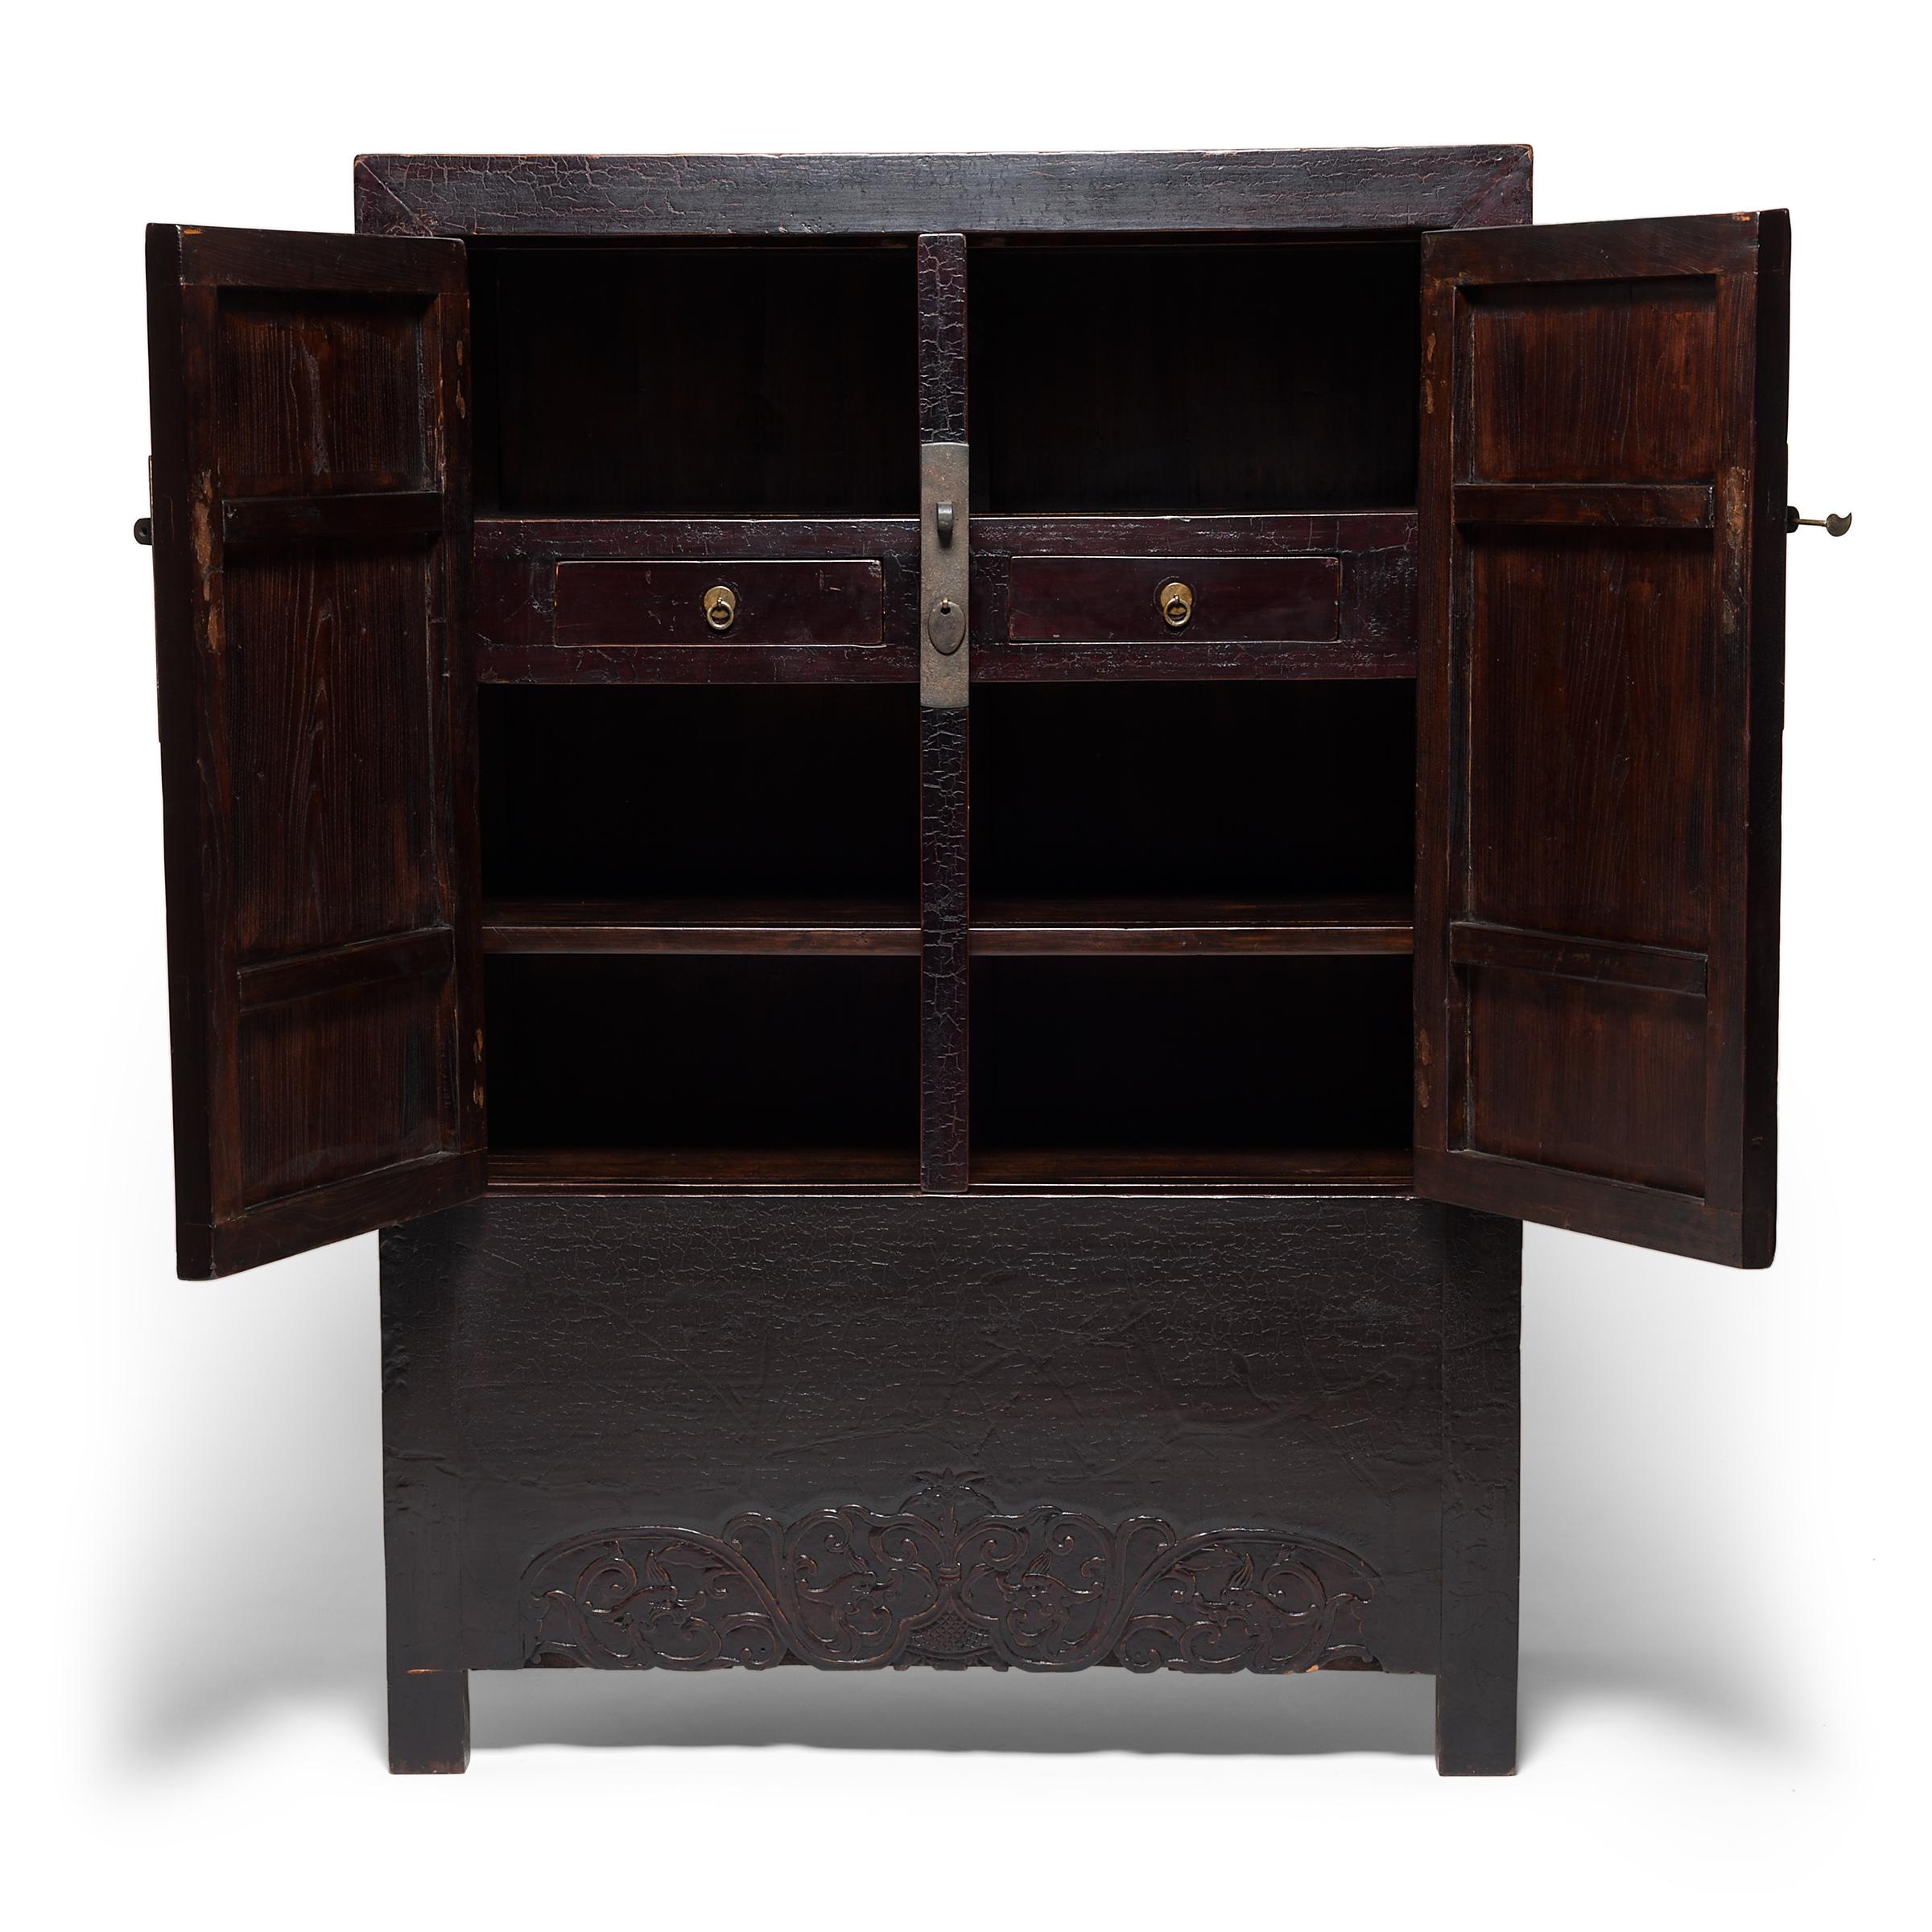 This 19th century cabinet from Shanxi province epitomizes the austerity of classical Chinese furniture design. Bare of ornament aside from its brass hardware, the cabinet's clean lines are contrasted by its subtly carved apron. The intricate